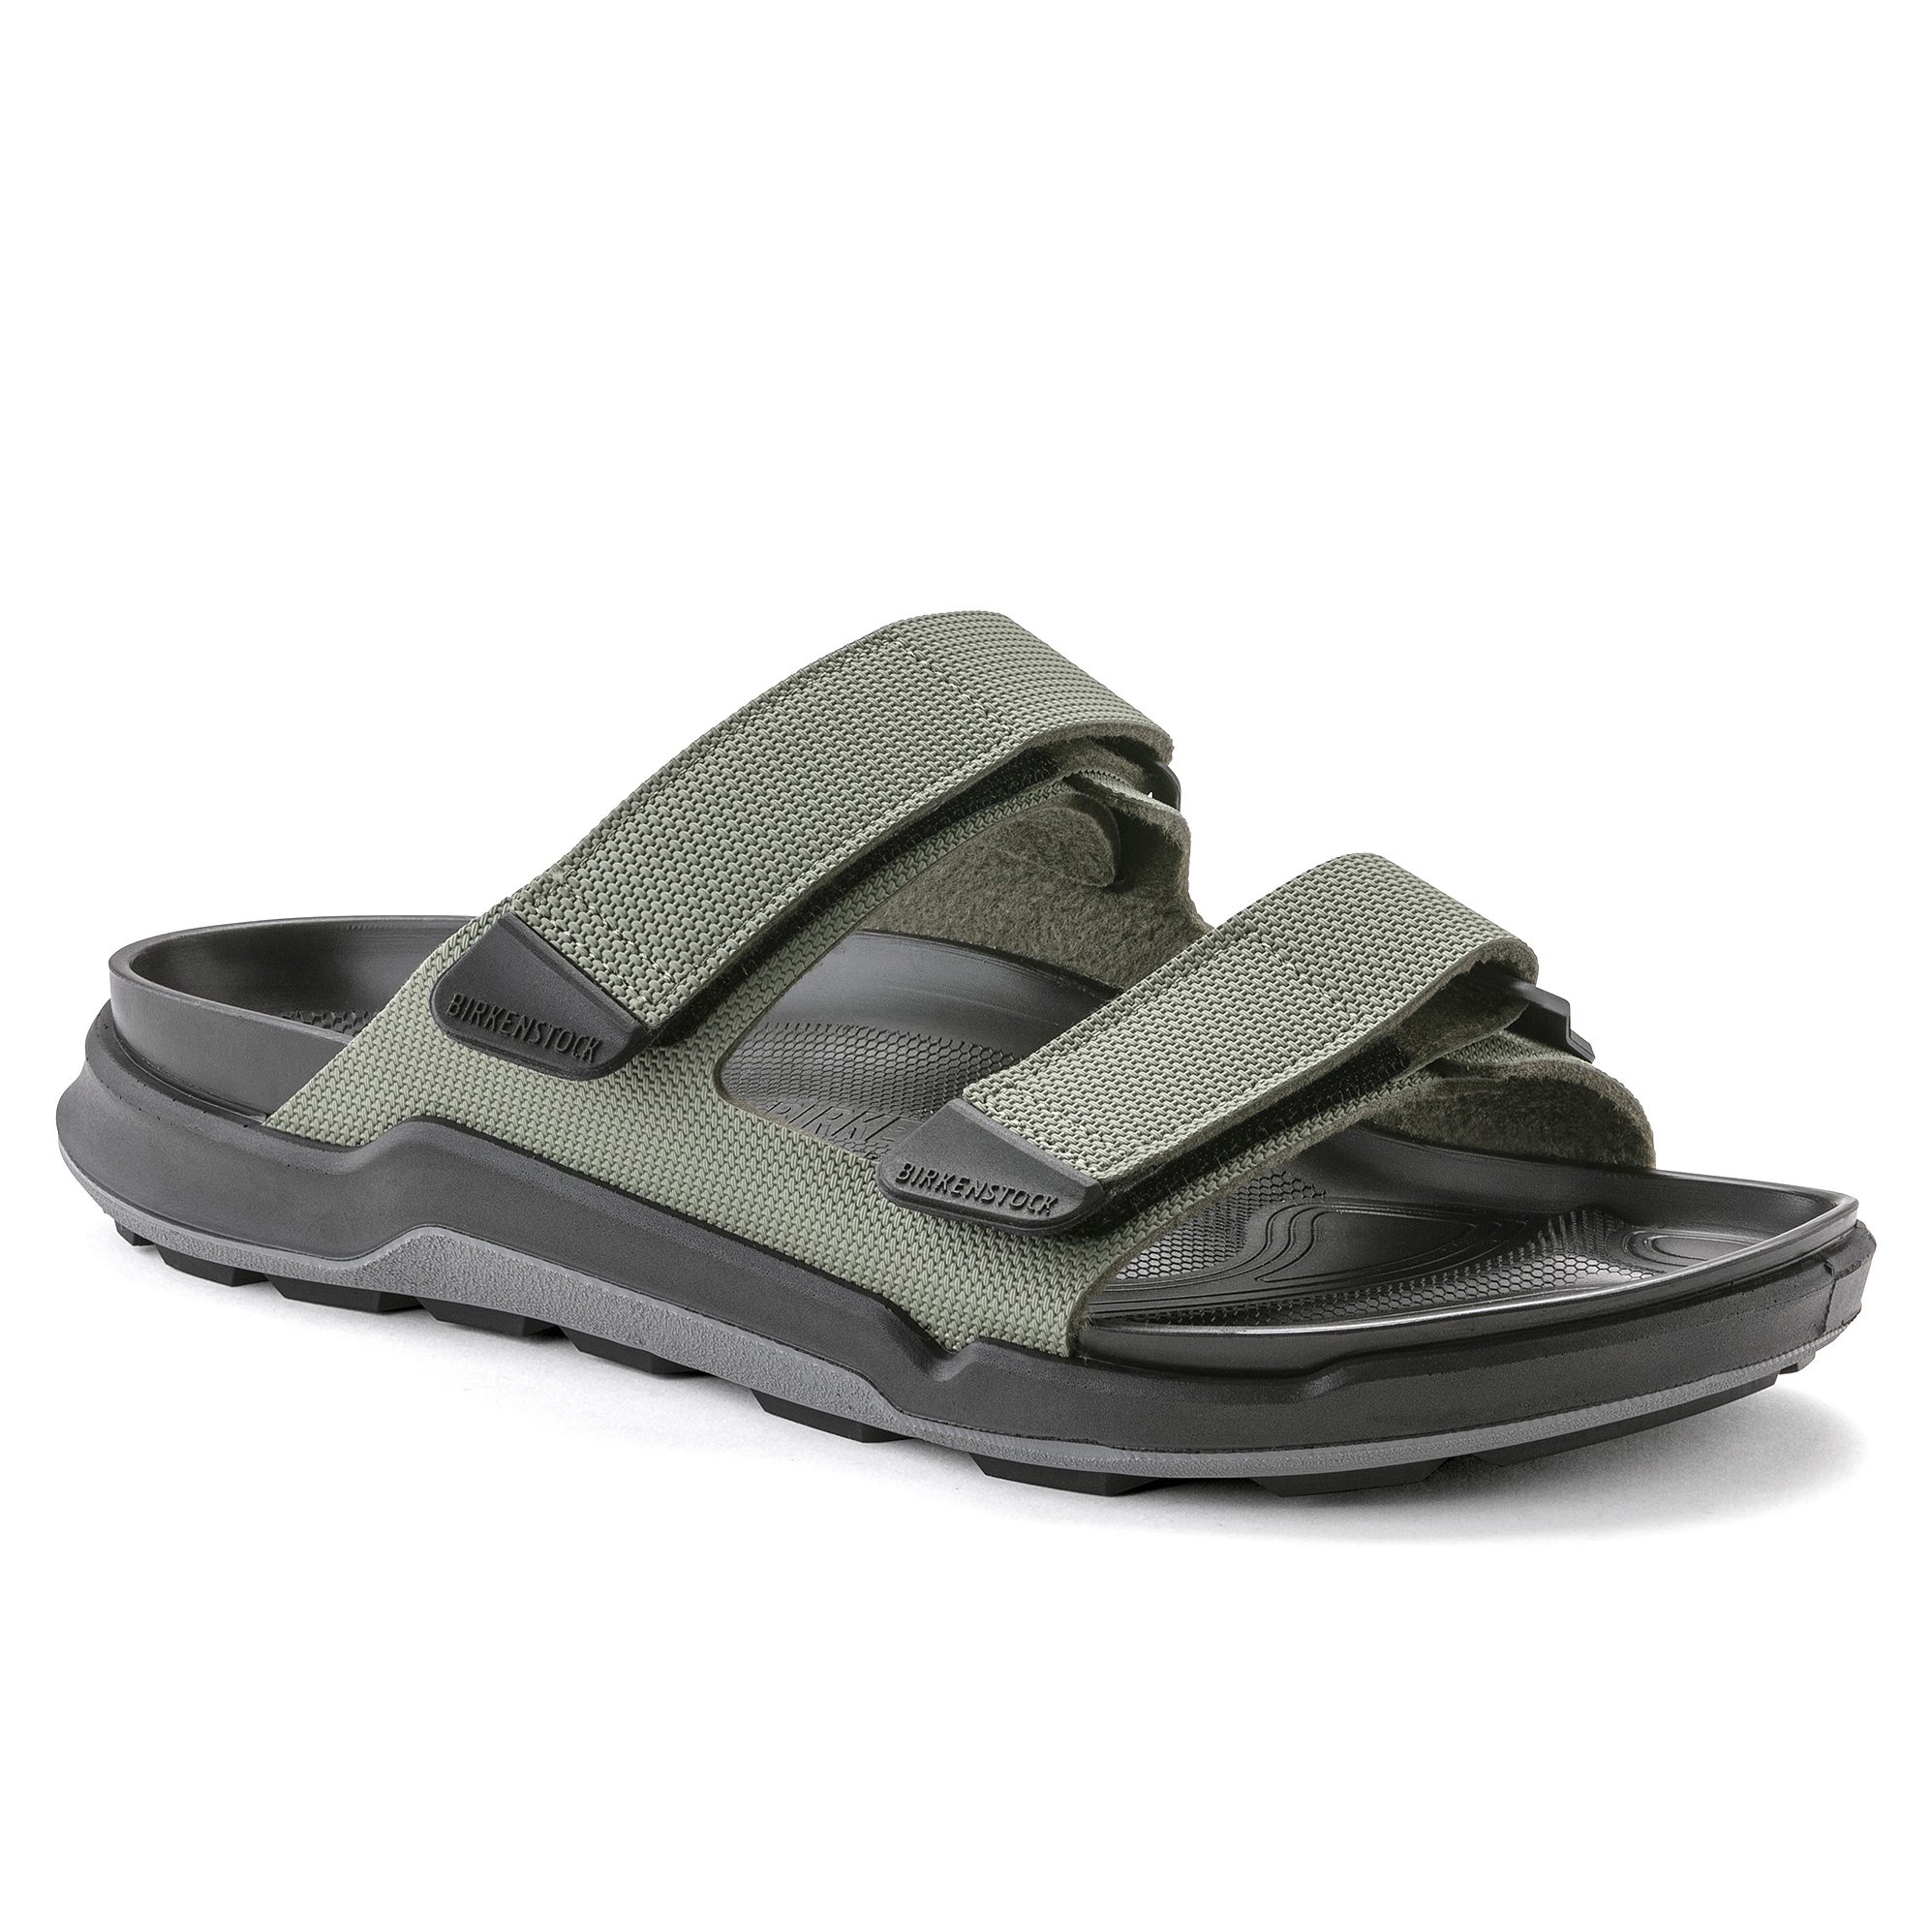 The Cutest, Most Comfy Birkenstock Sandals Are on Sale at Nordstrom Right  Now | Best walking sandals, Comfortable walking sandals, Womens sandals